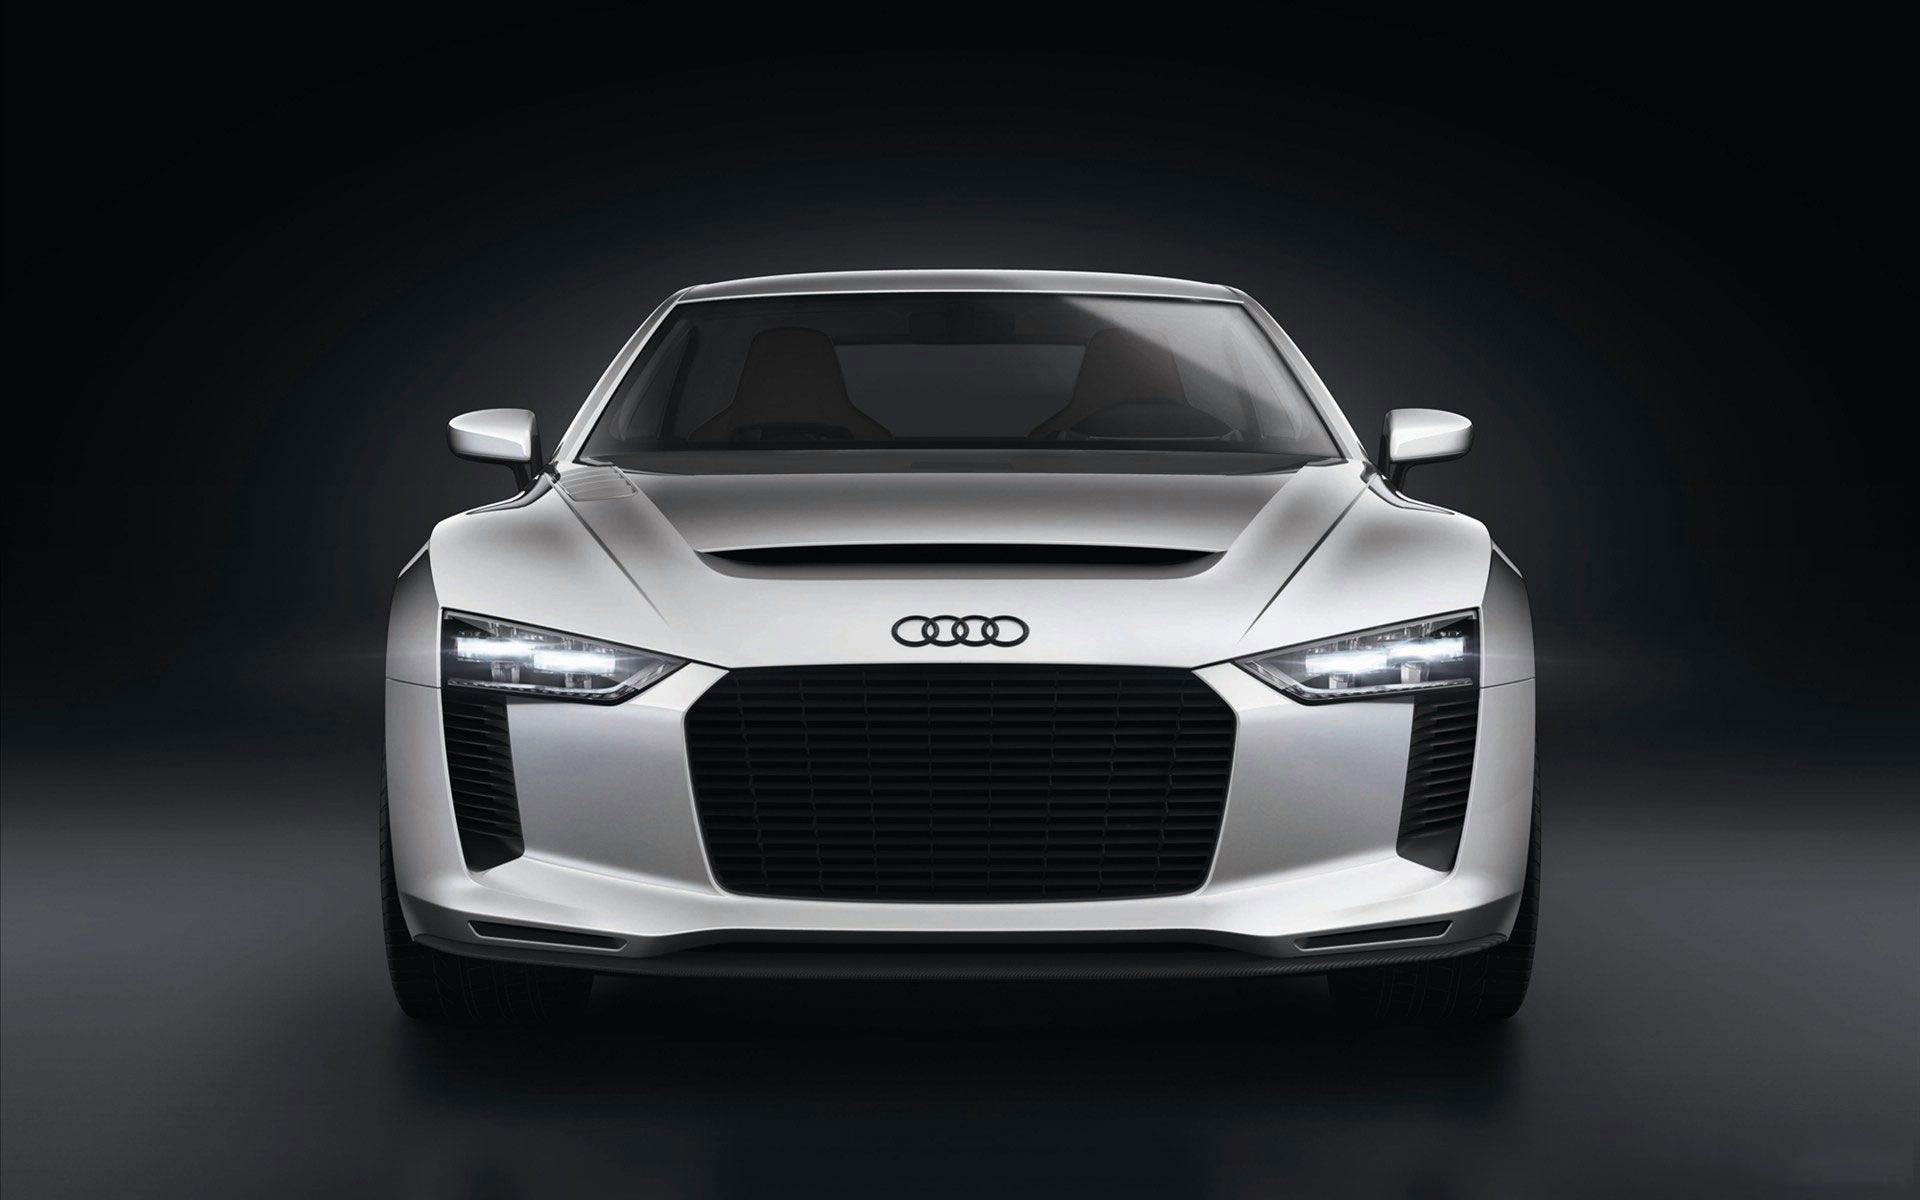 Audi Concept Image For Desktop And Wallpaper Nice Rides